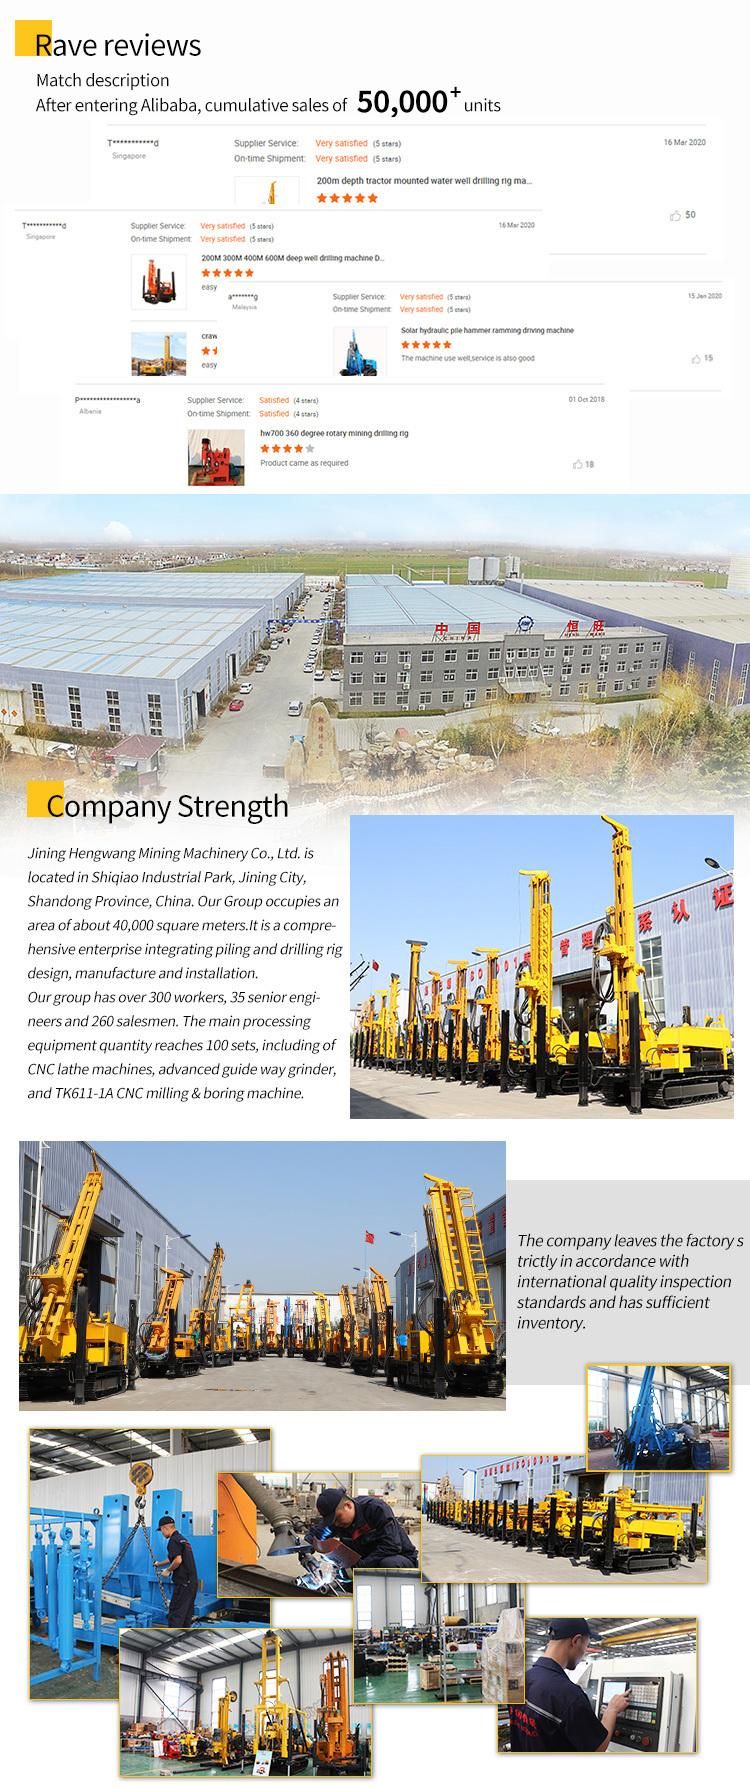 China Wholesales Drilling Machine Water Borehole Water Well Drilling Rig with Air Compressor